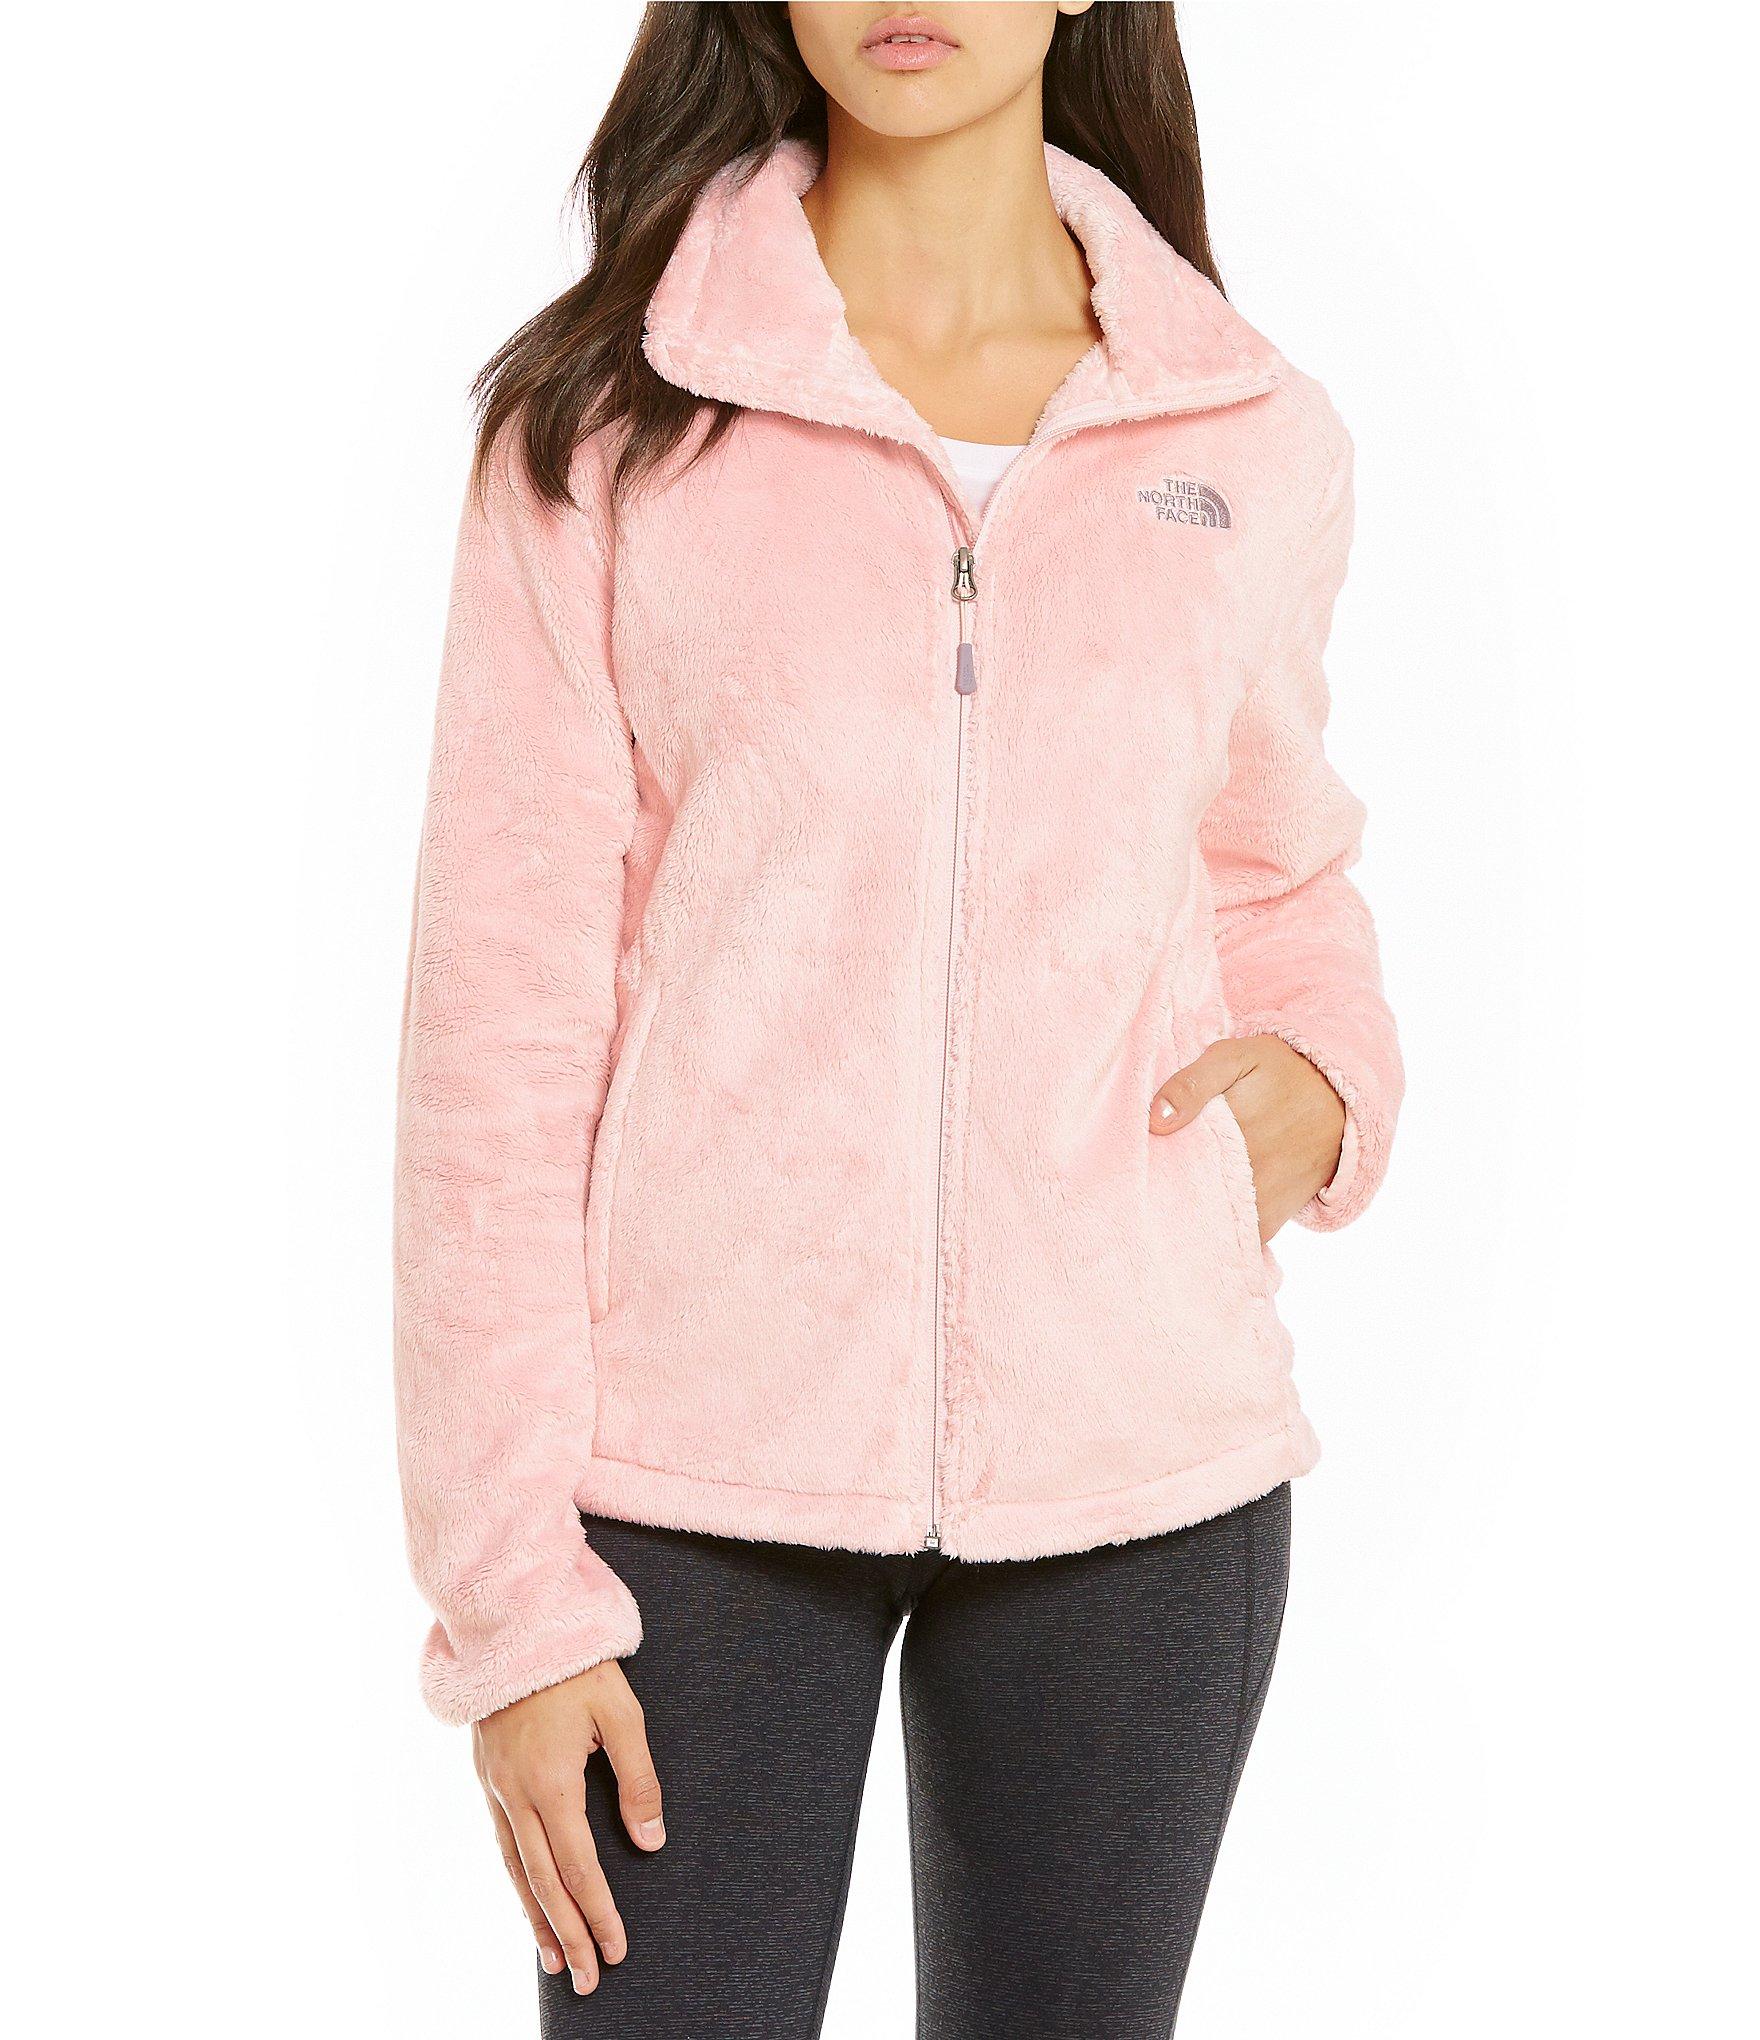 north face pink osito jacket